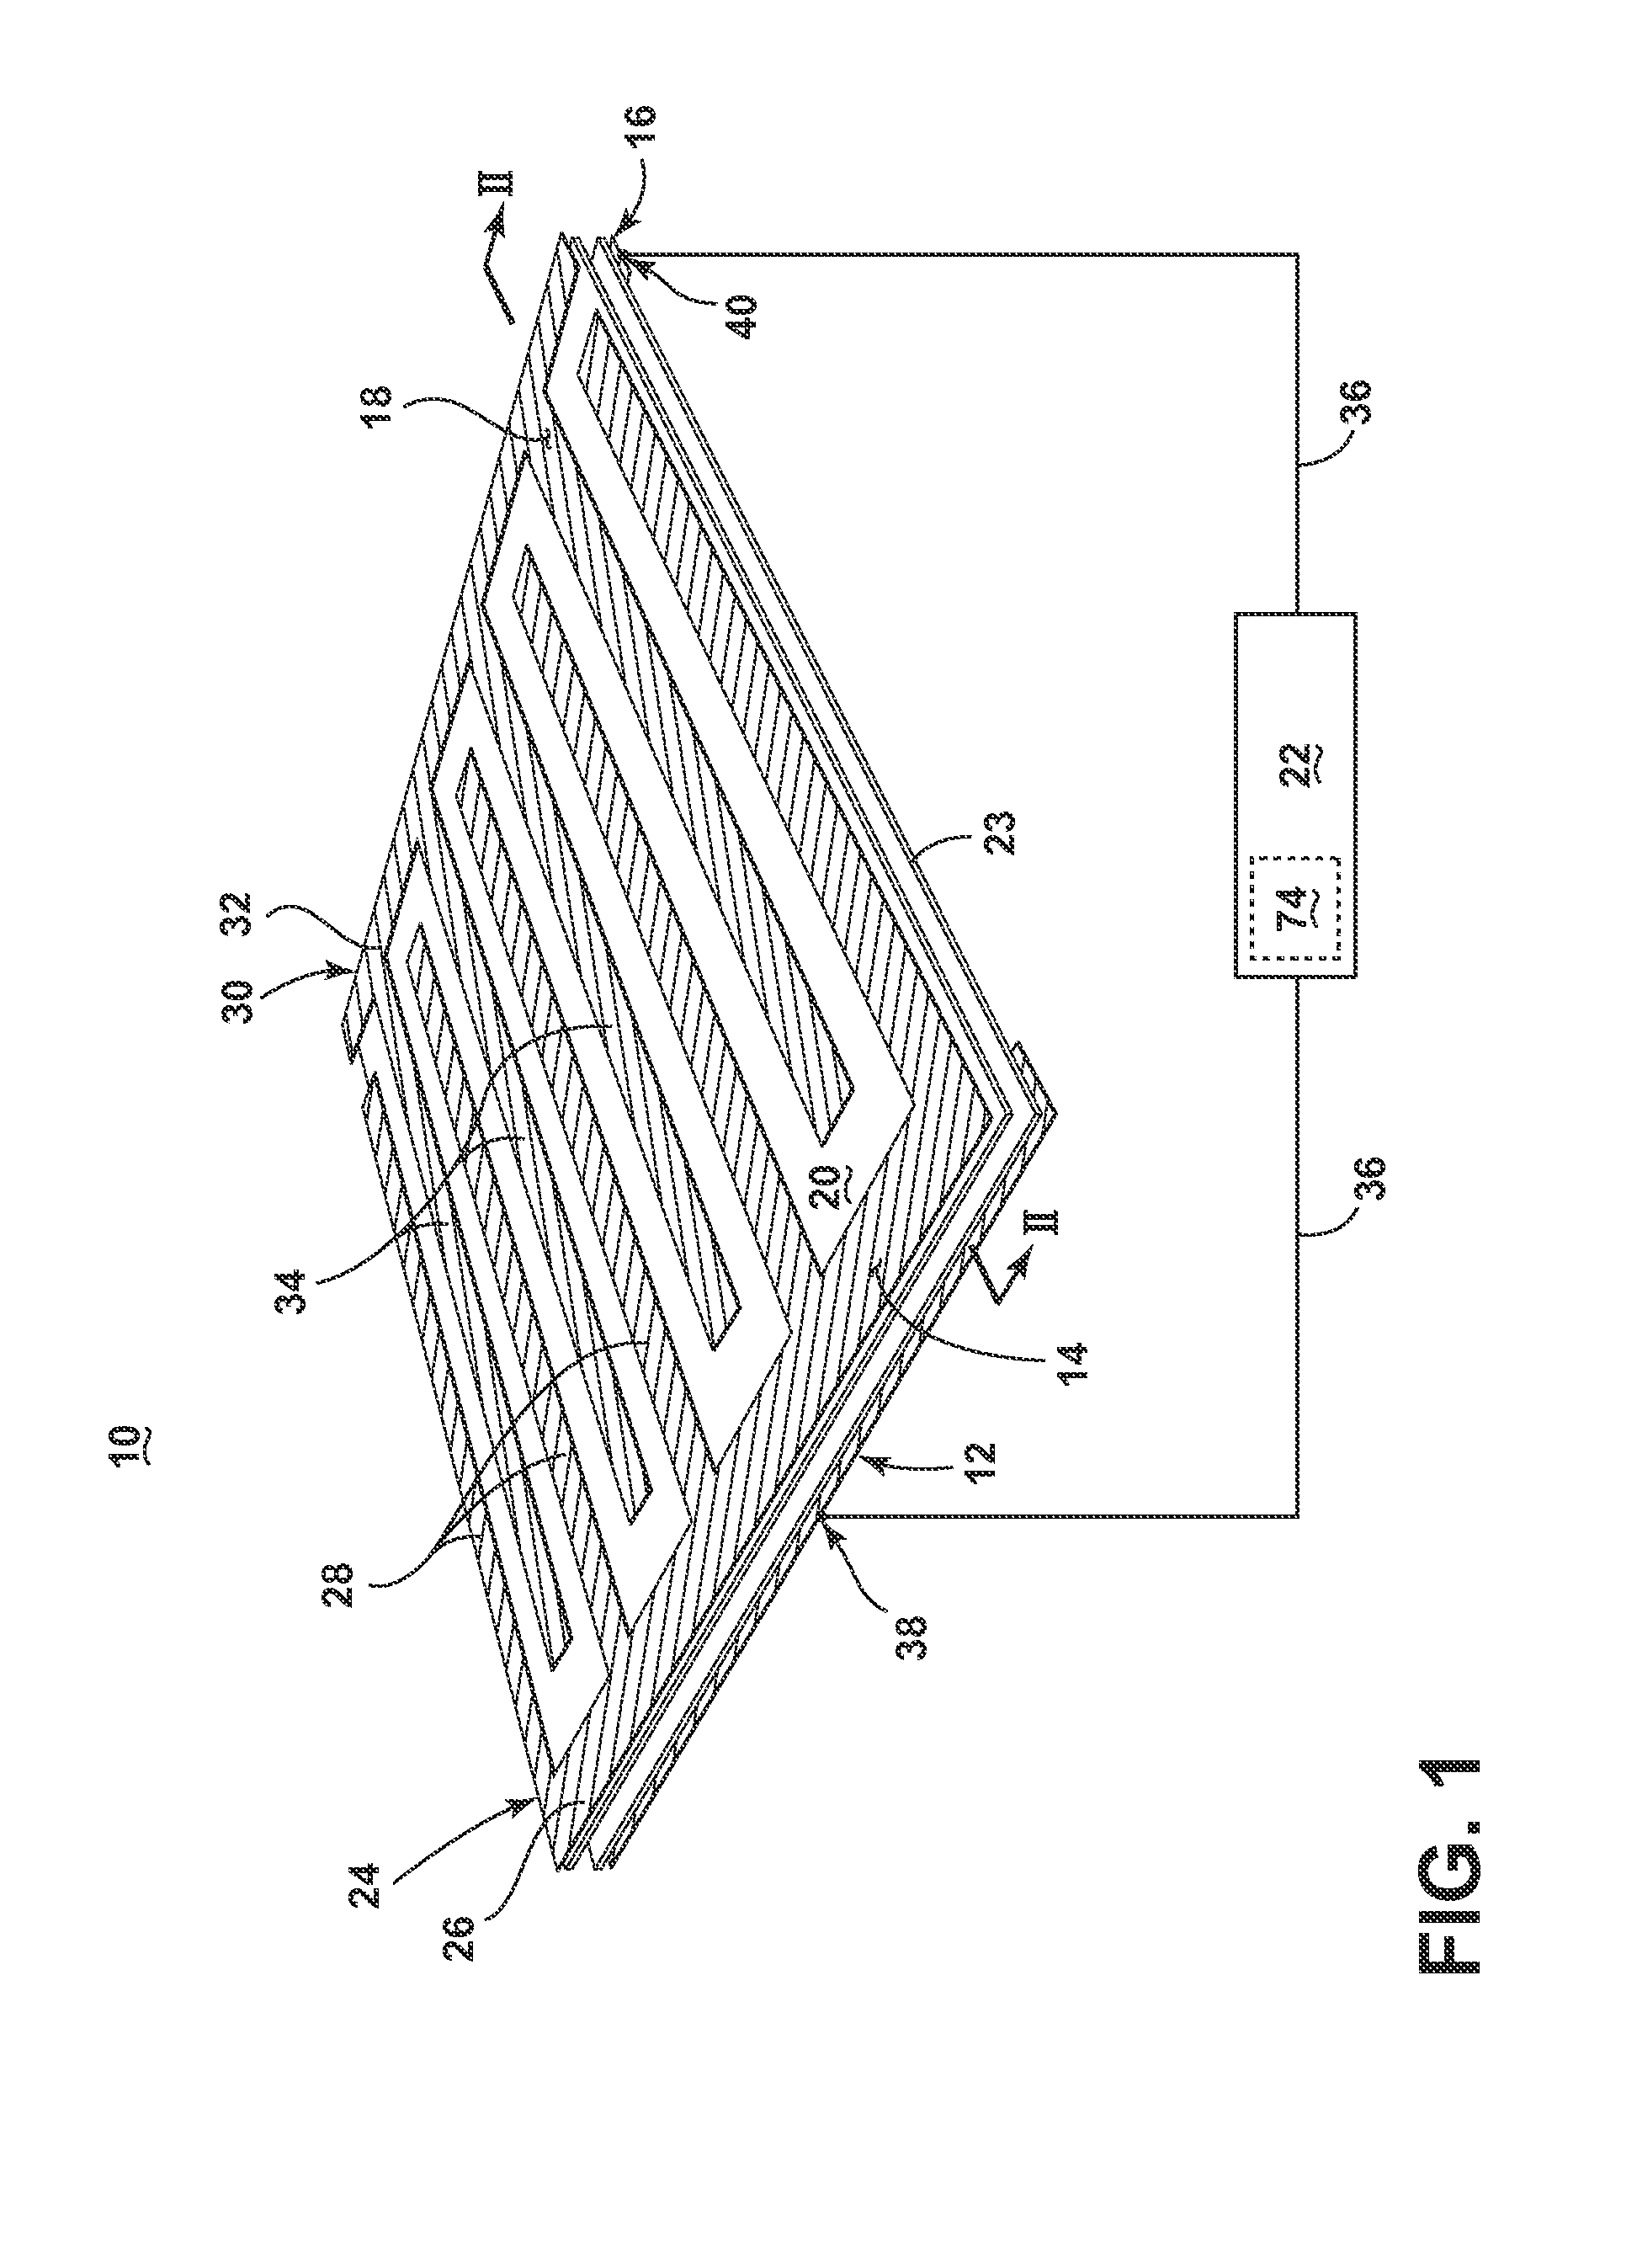 Method and apparatus for drying articles